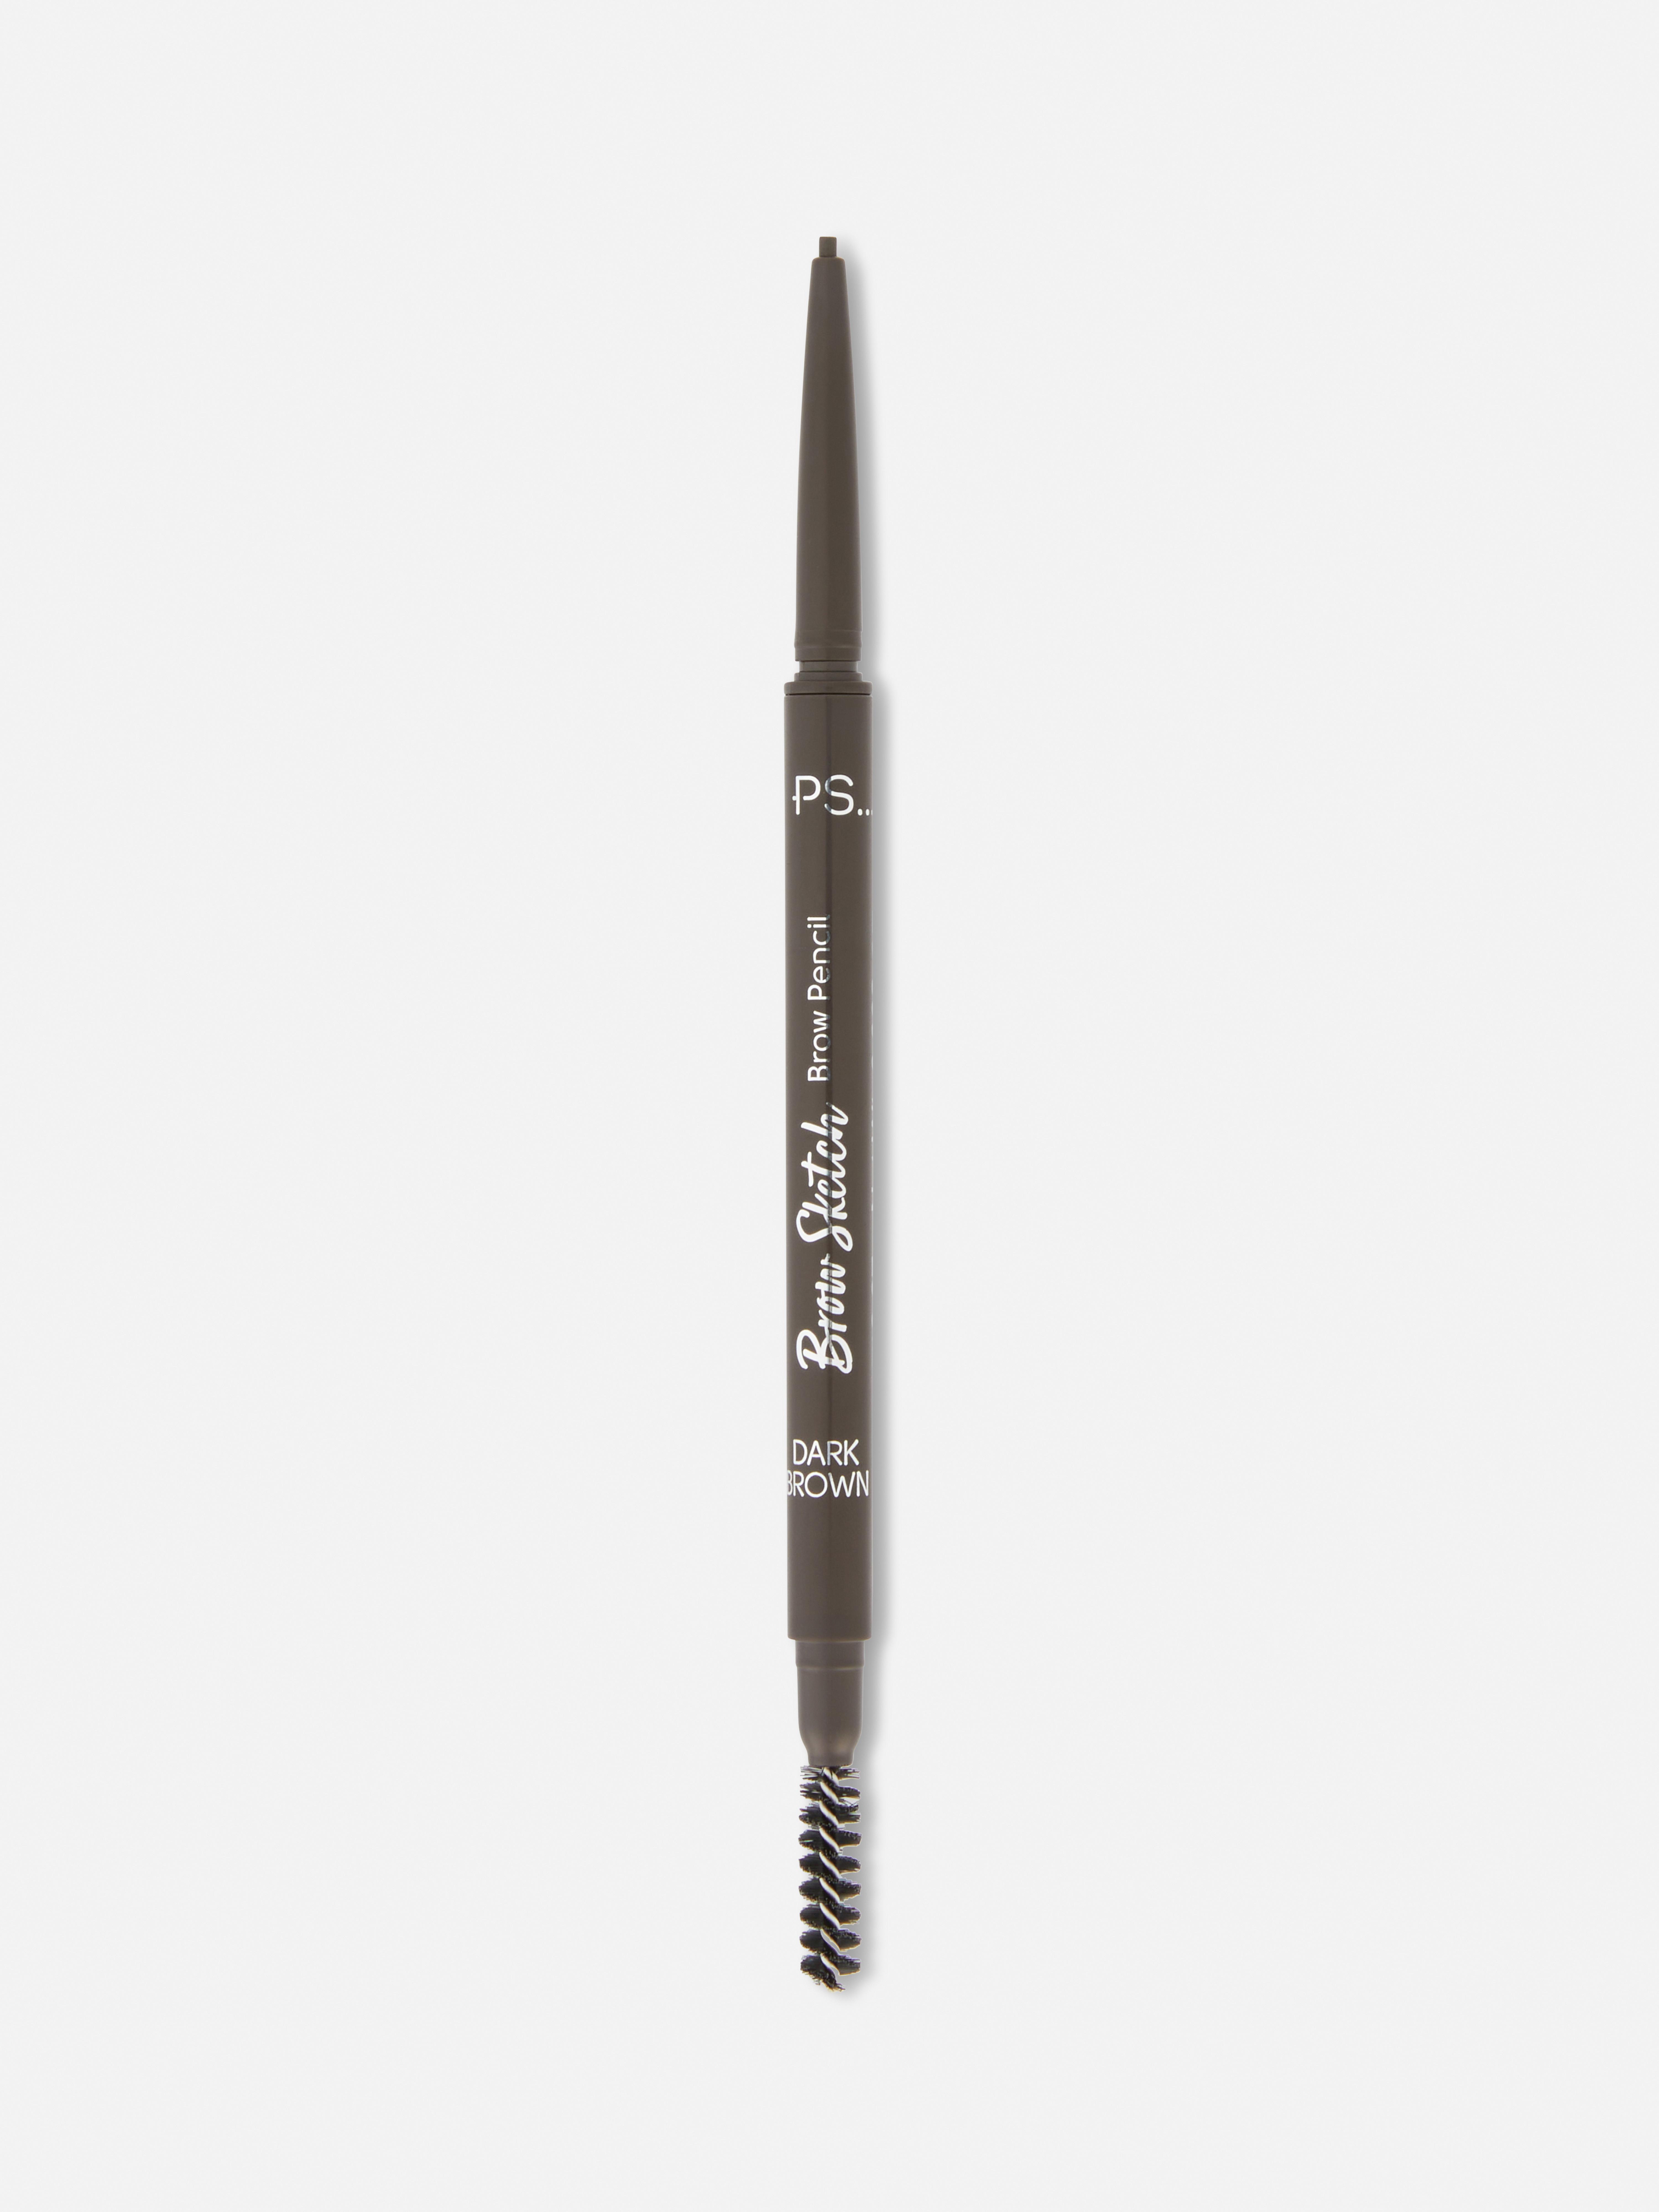 PS... Line Brow Defining Duo